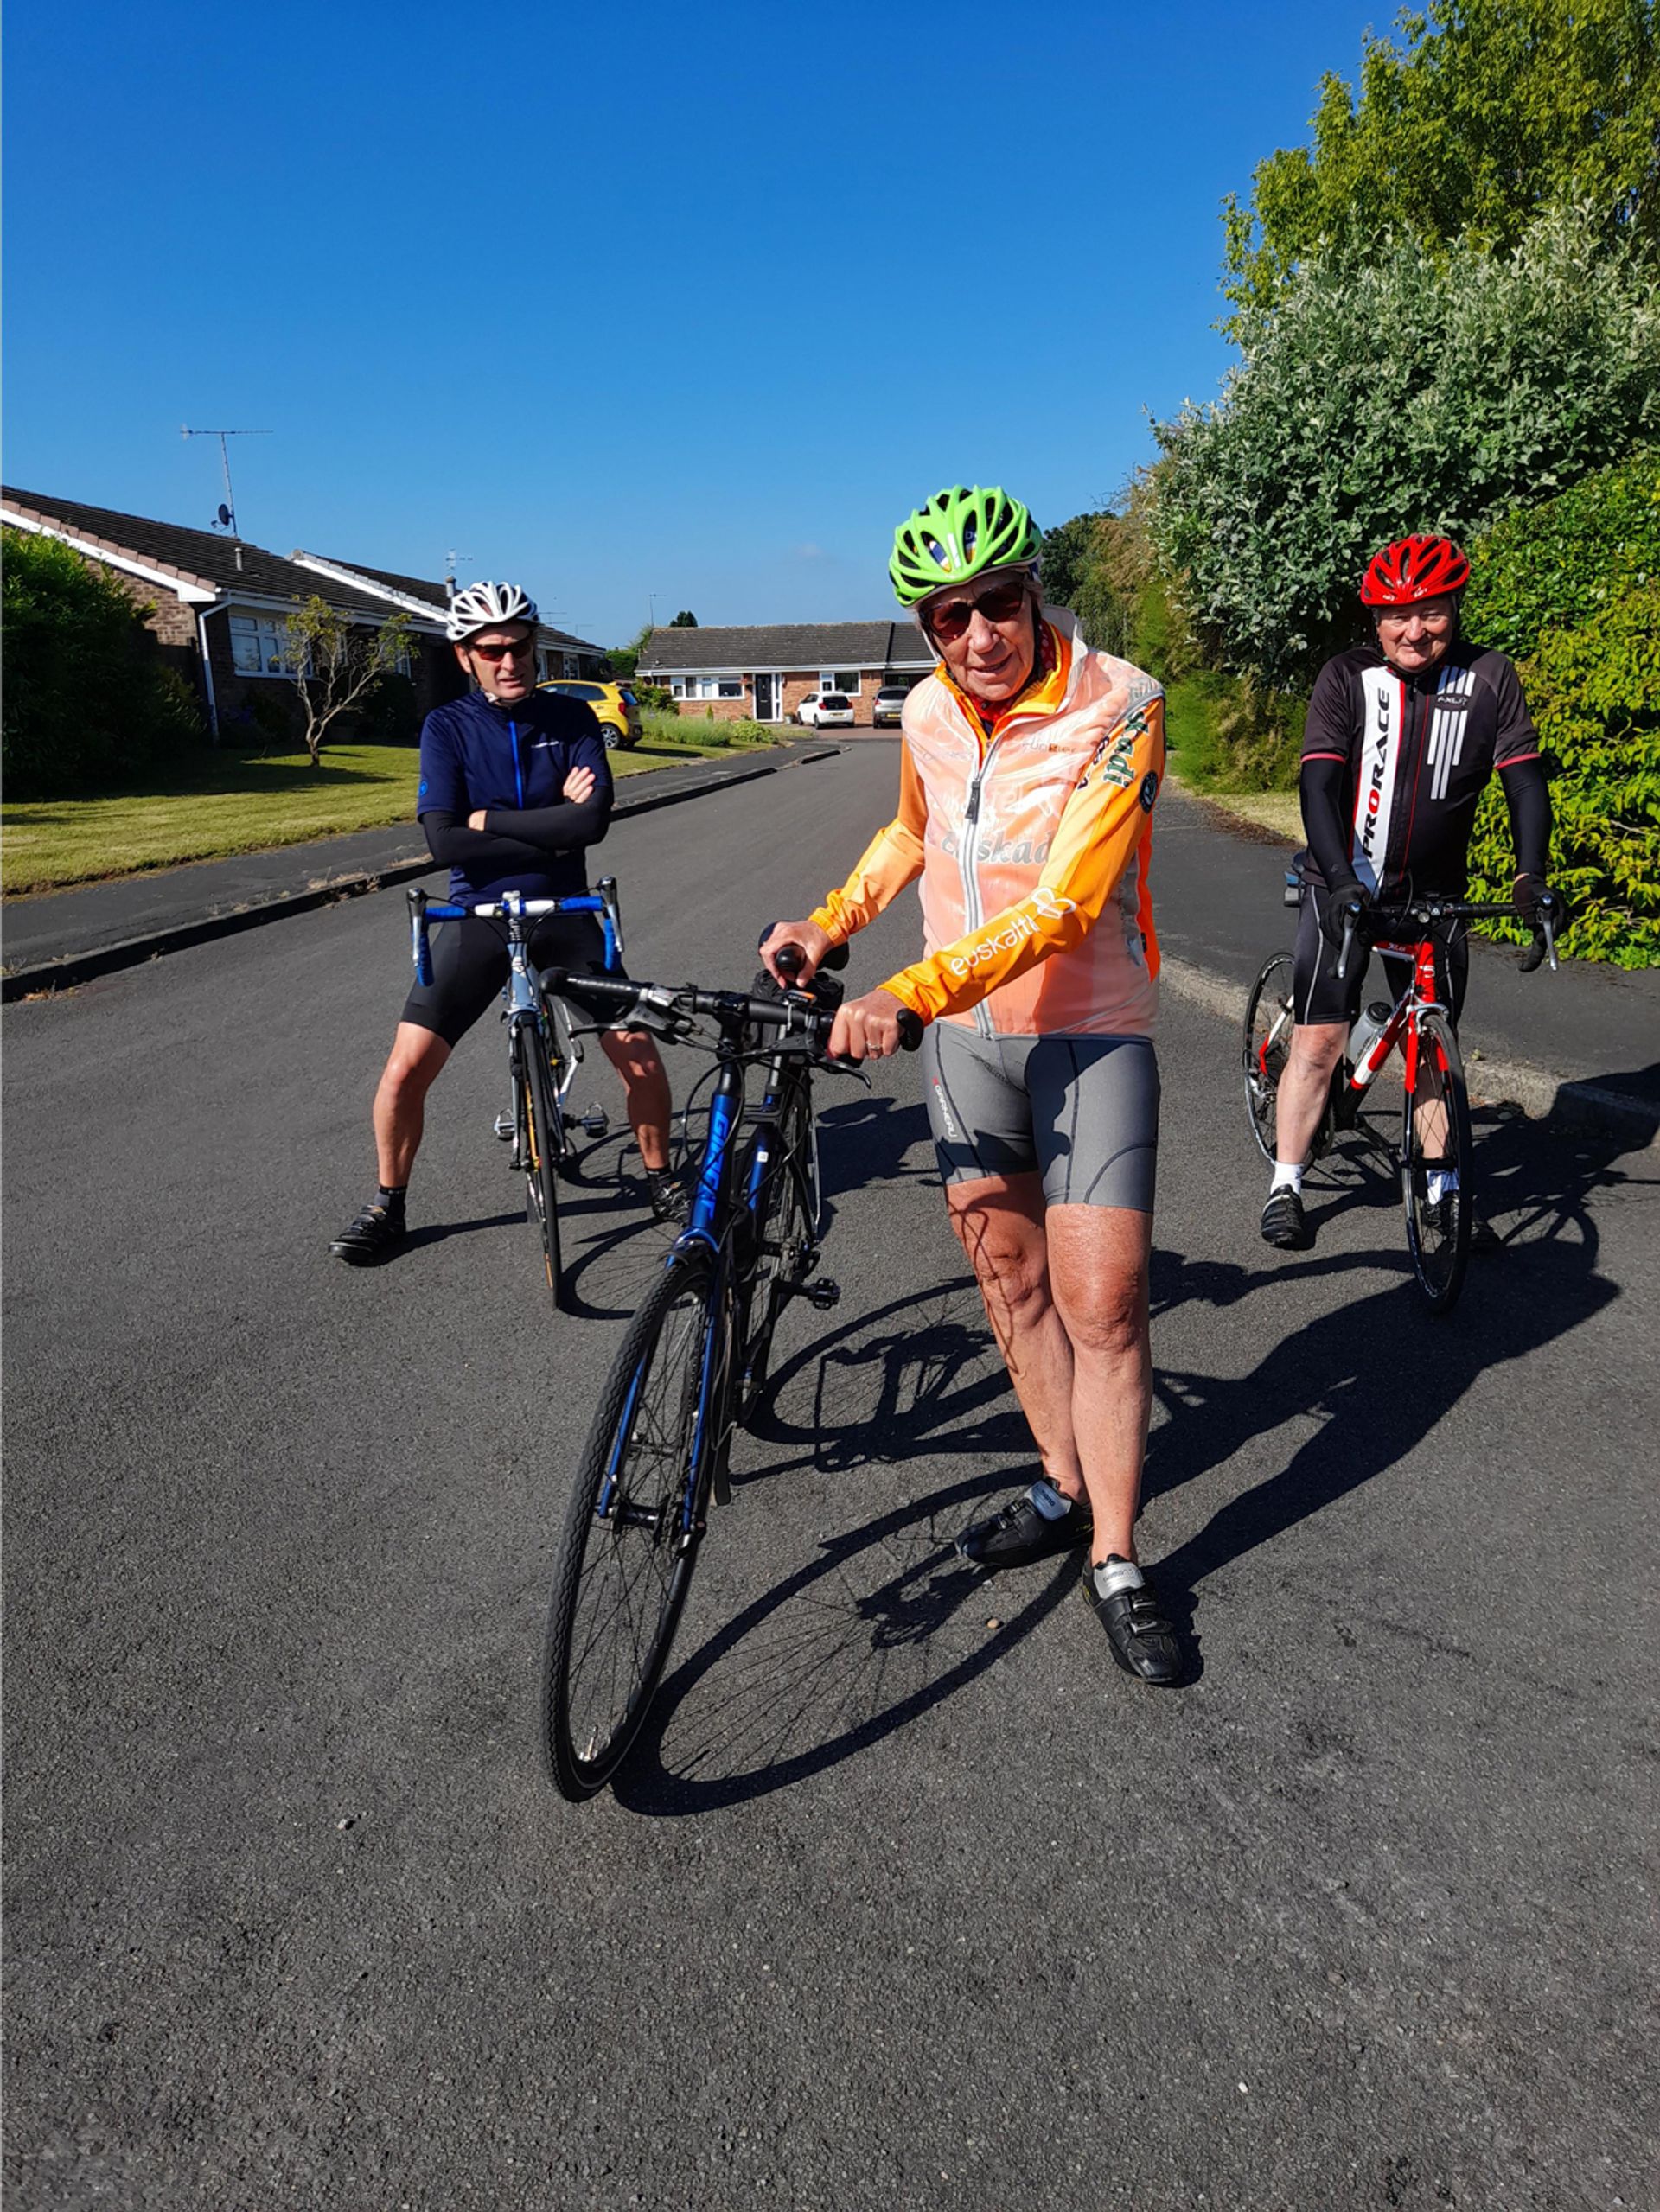 80th Birthday celebrated in style by cycling 80 miles!